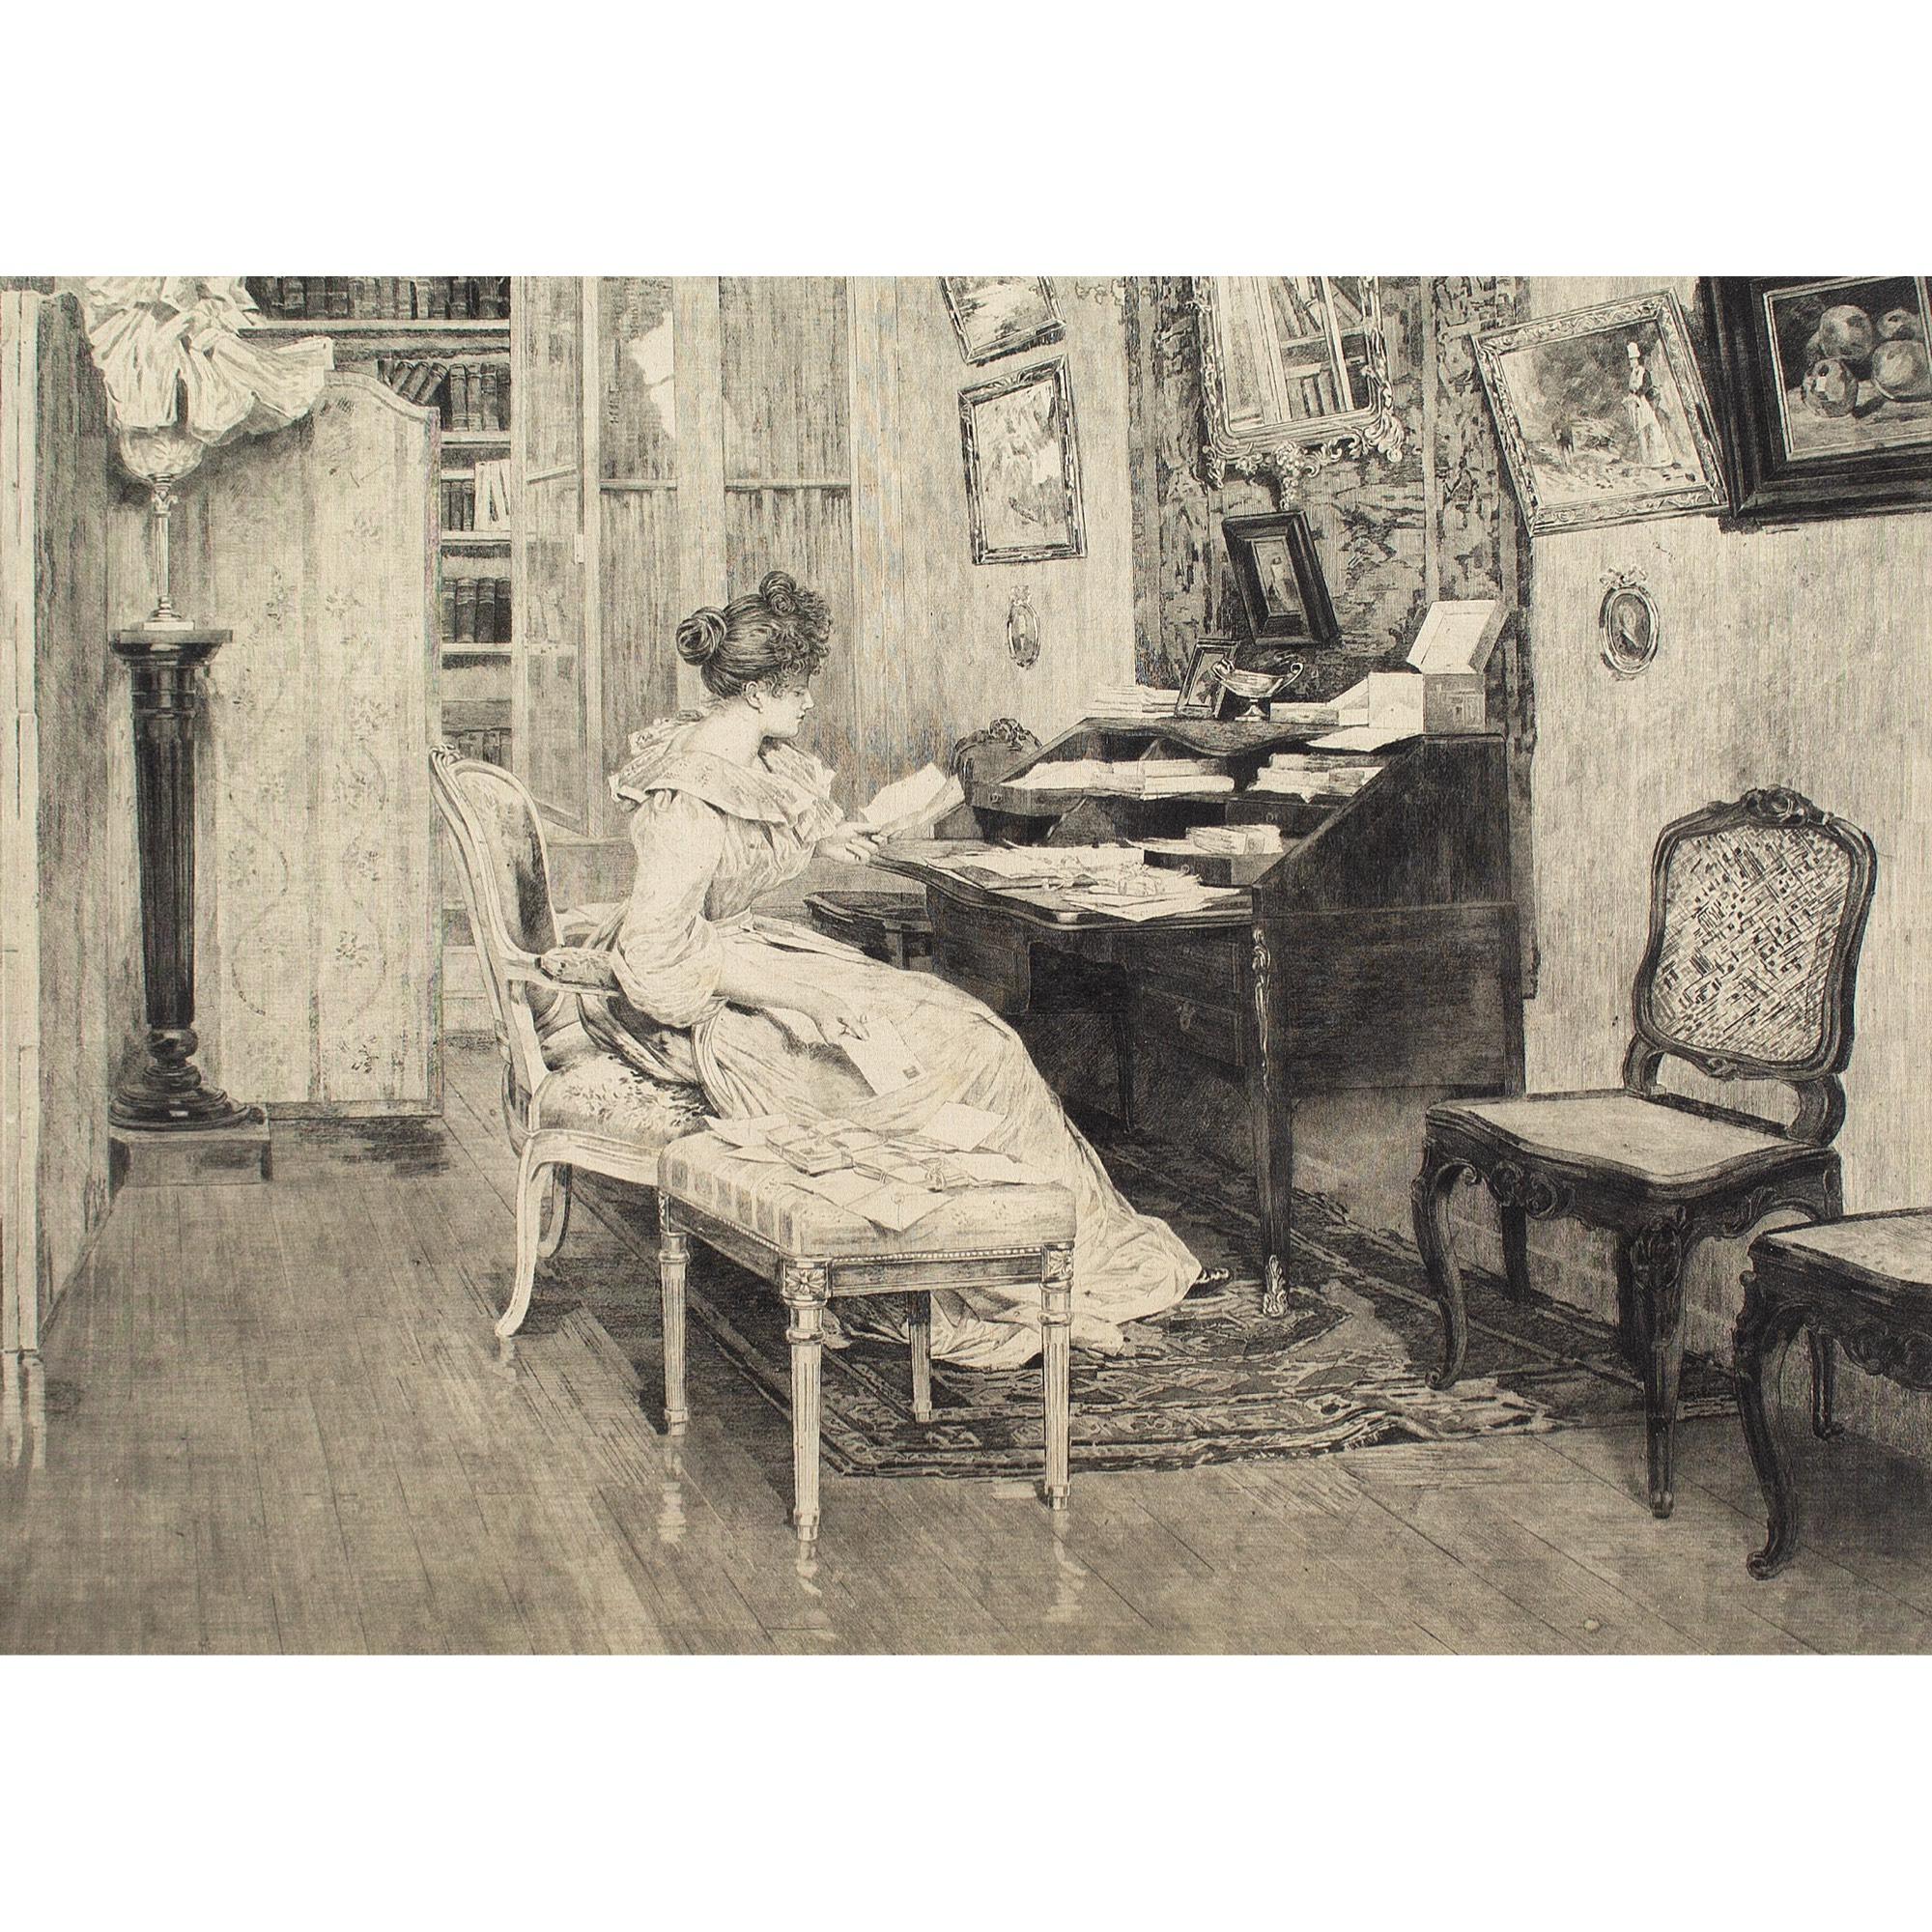 Late 19th-Century British School, Interior Scene With Woman Reading - Print by Unknown